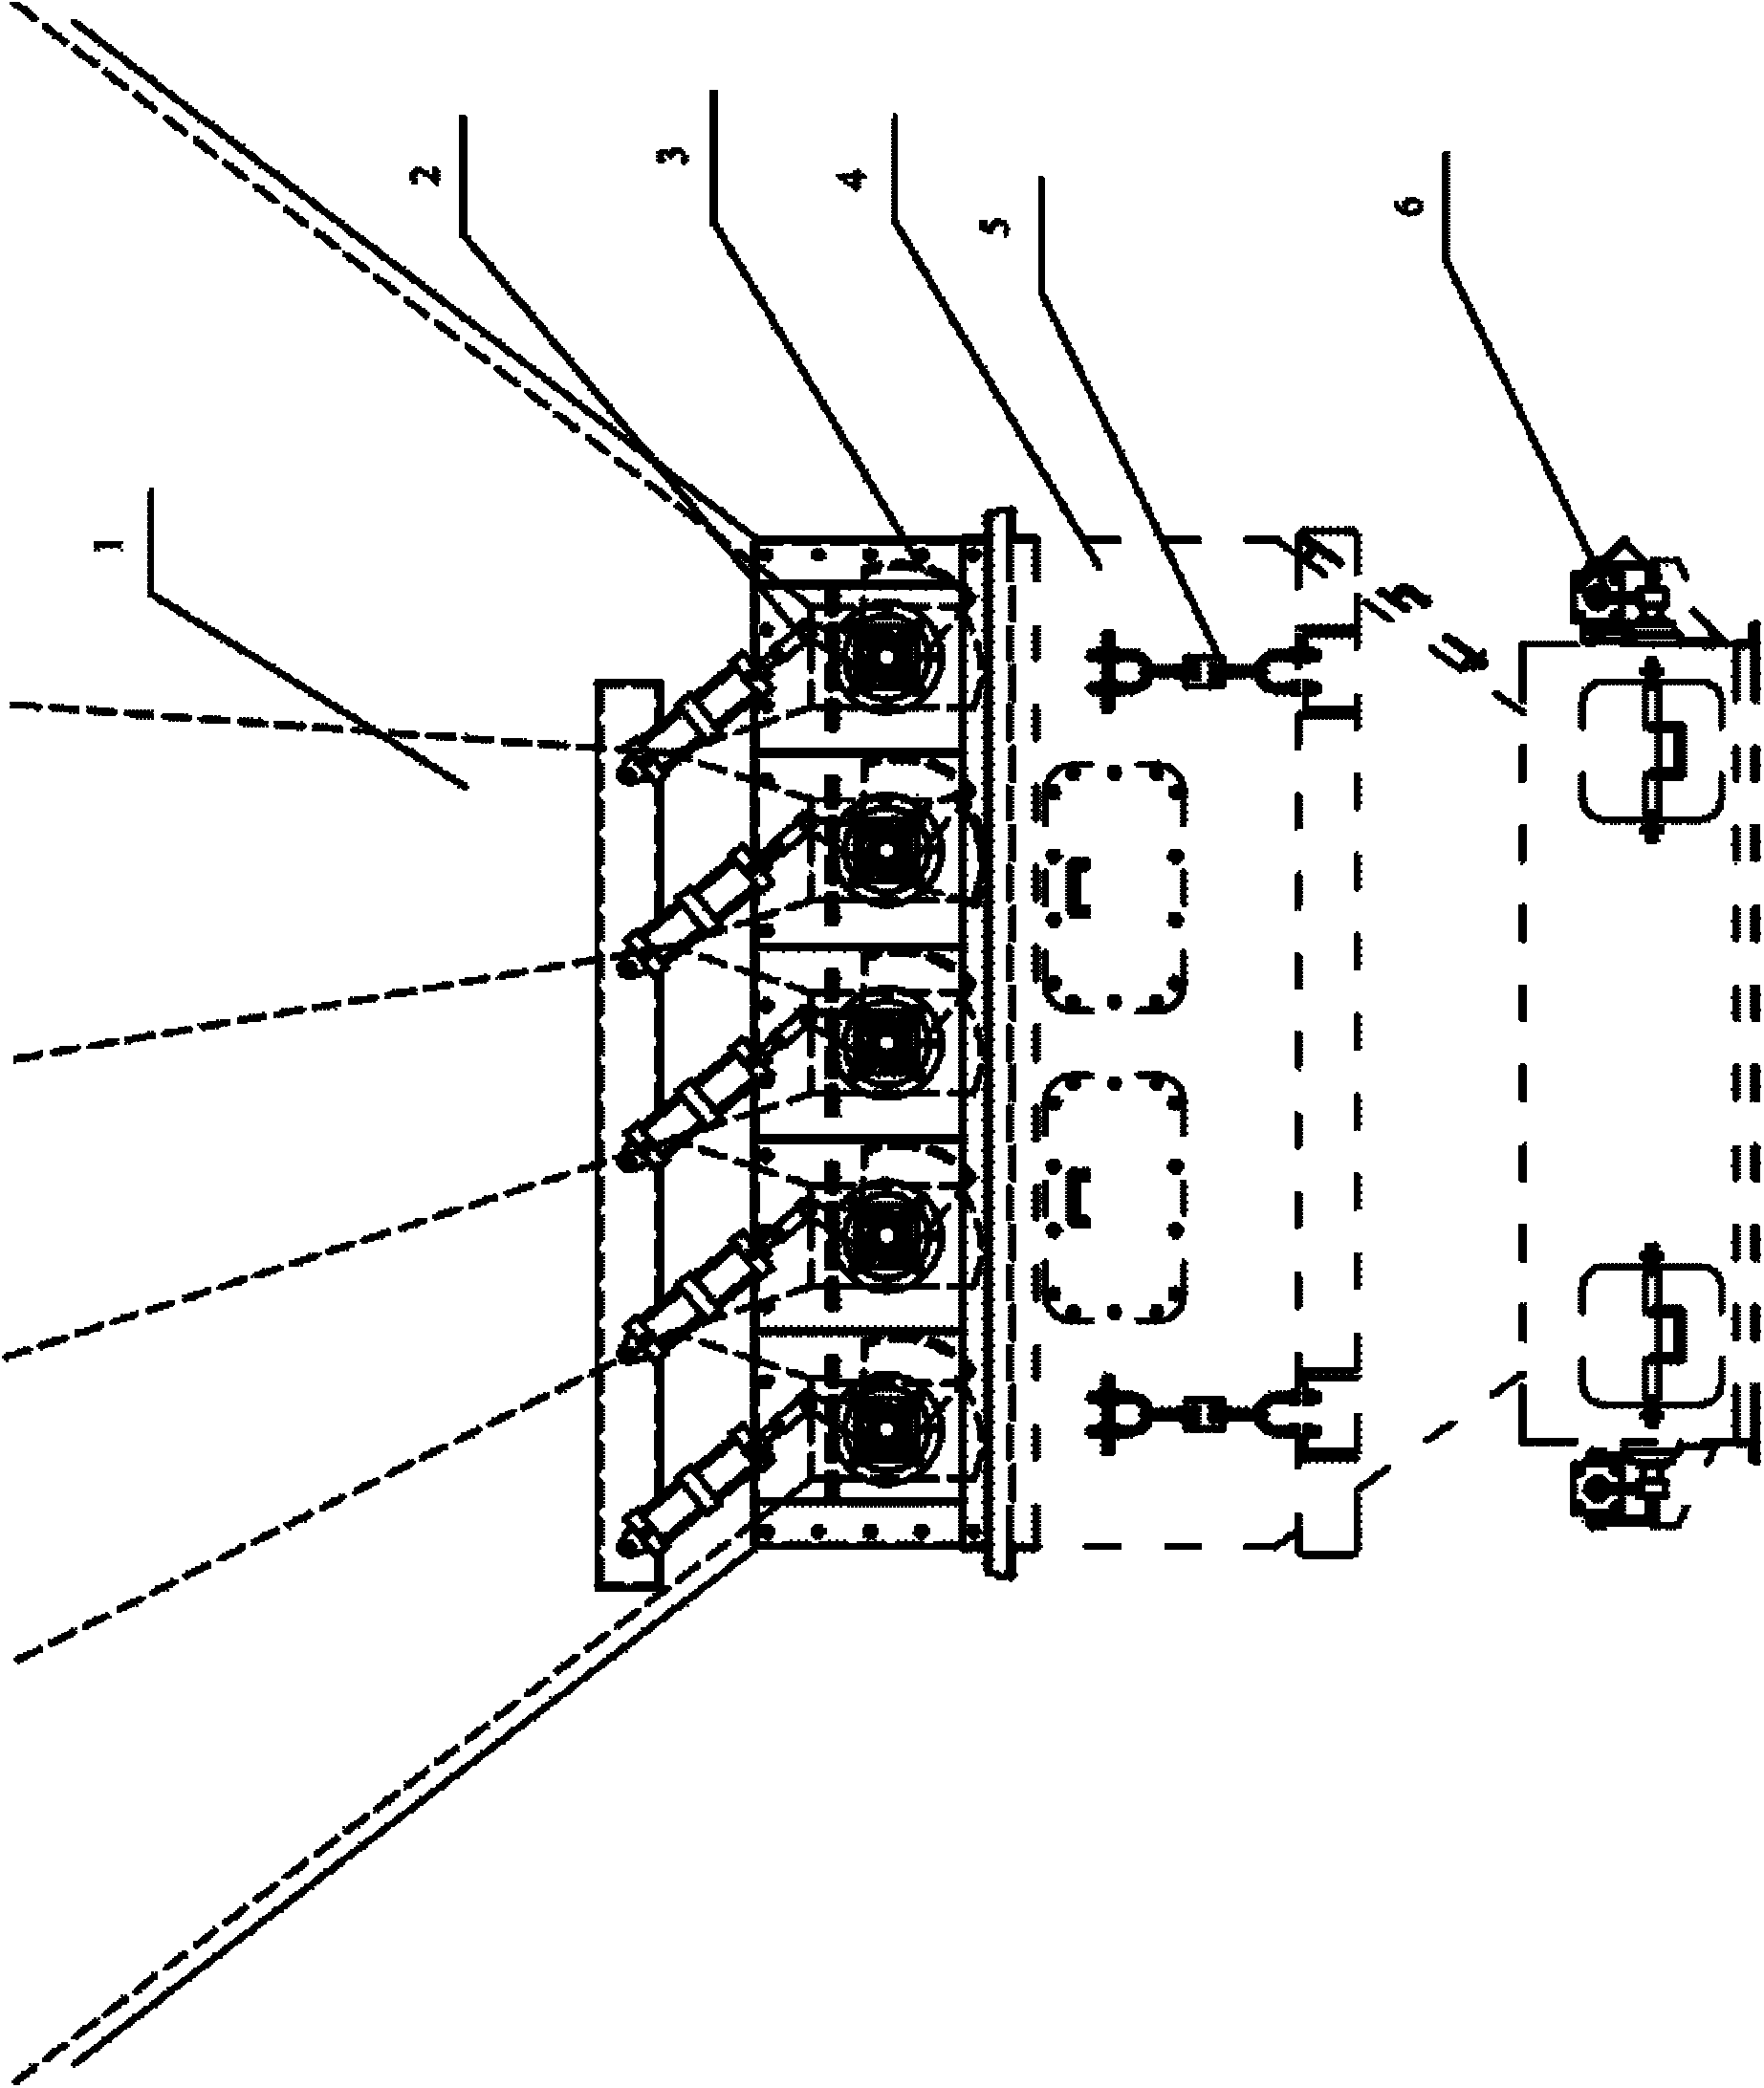 Aggregate weighing system for asphalt mixture